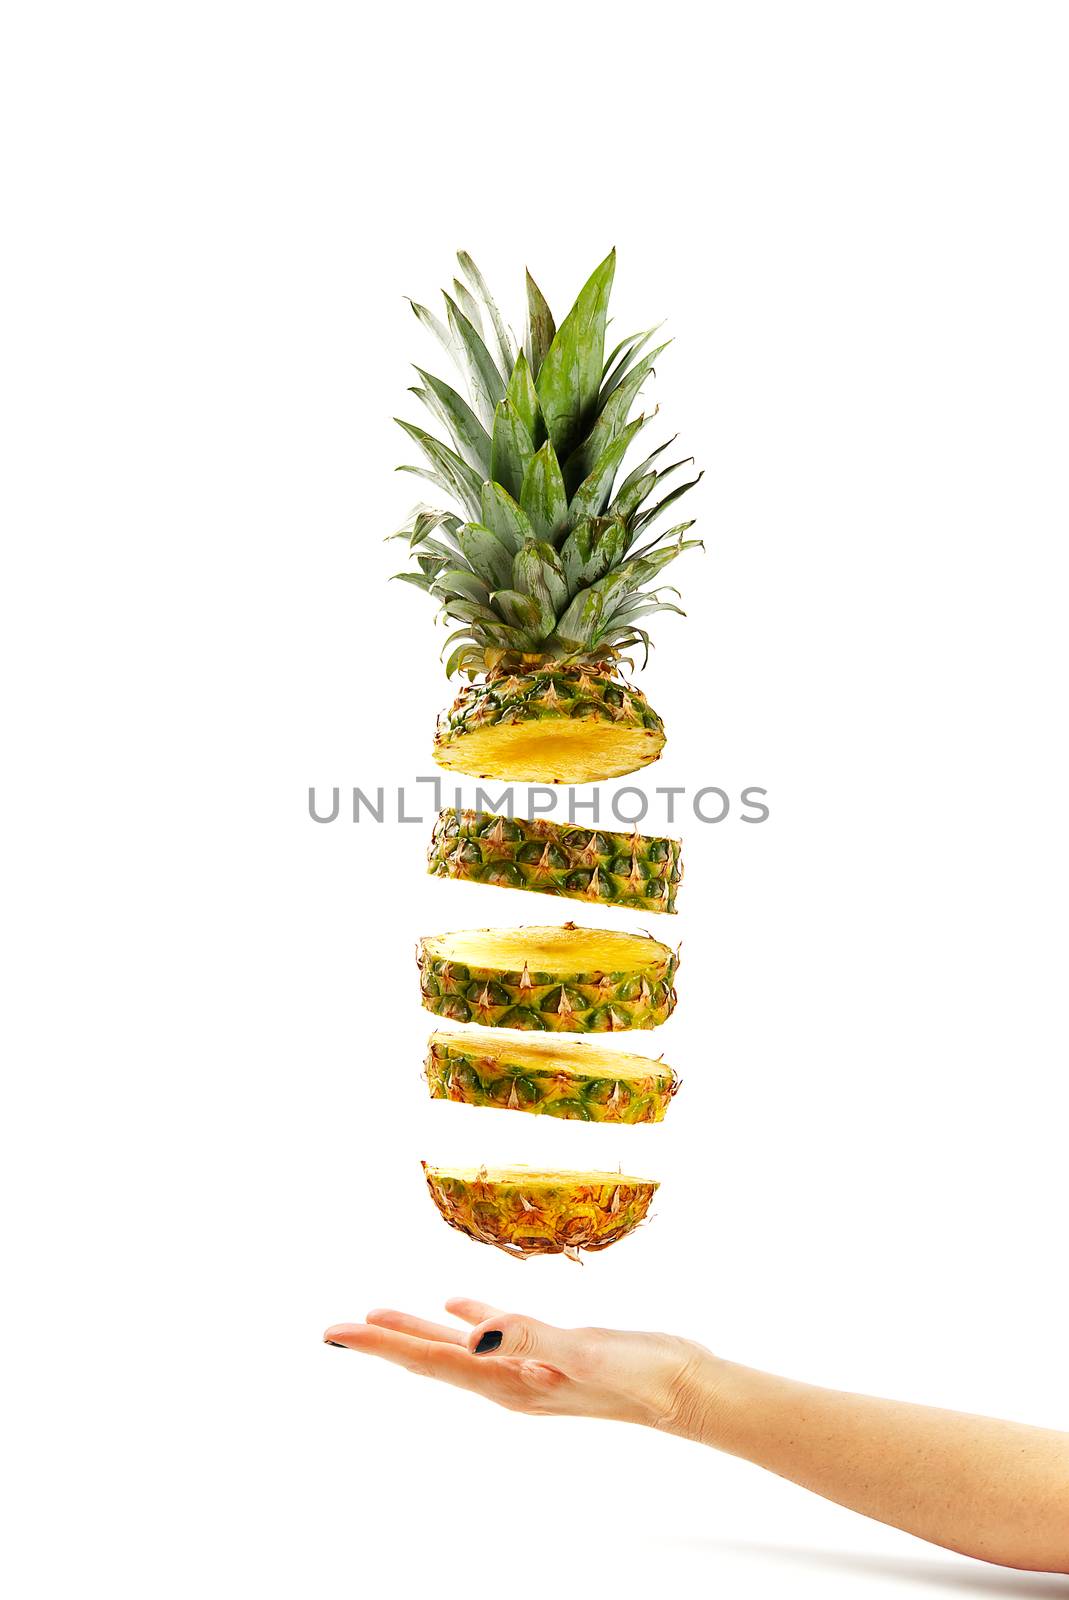 Pineapple fresh ananas. Pineapple sliced, levitates in the air. Tropical fruit. Concept of summer mood on white background, isolate.